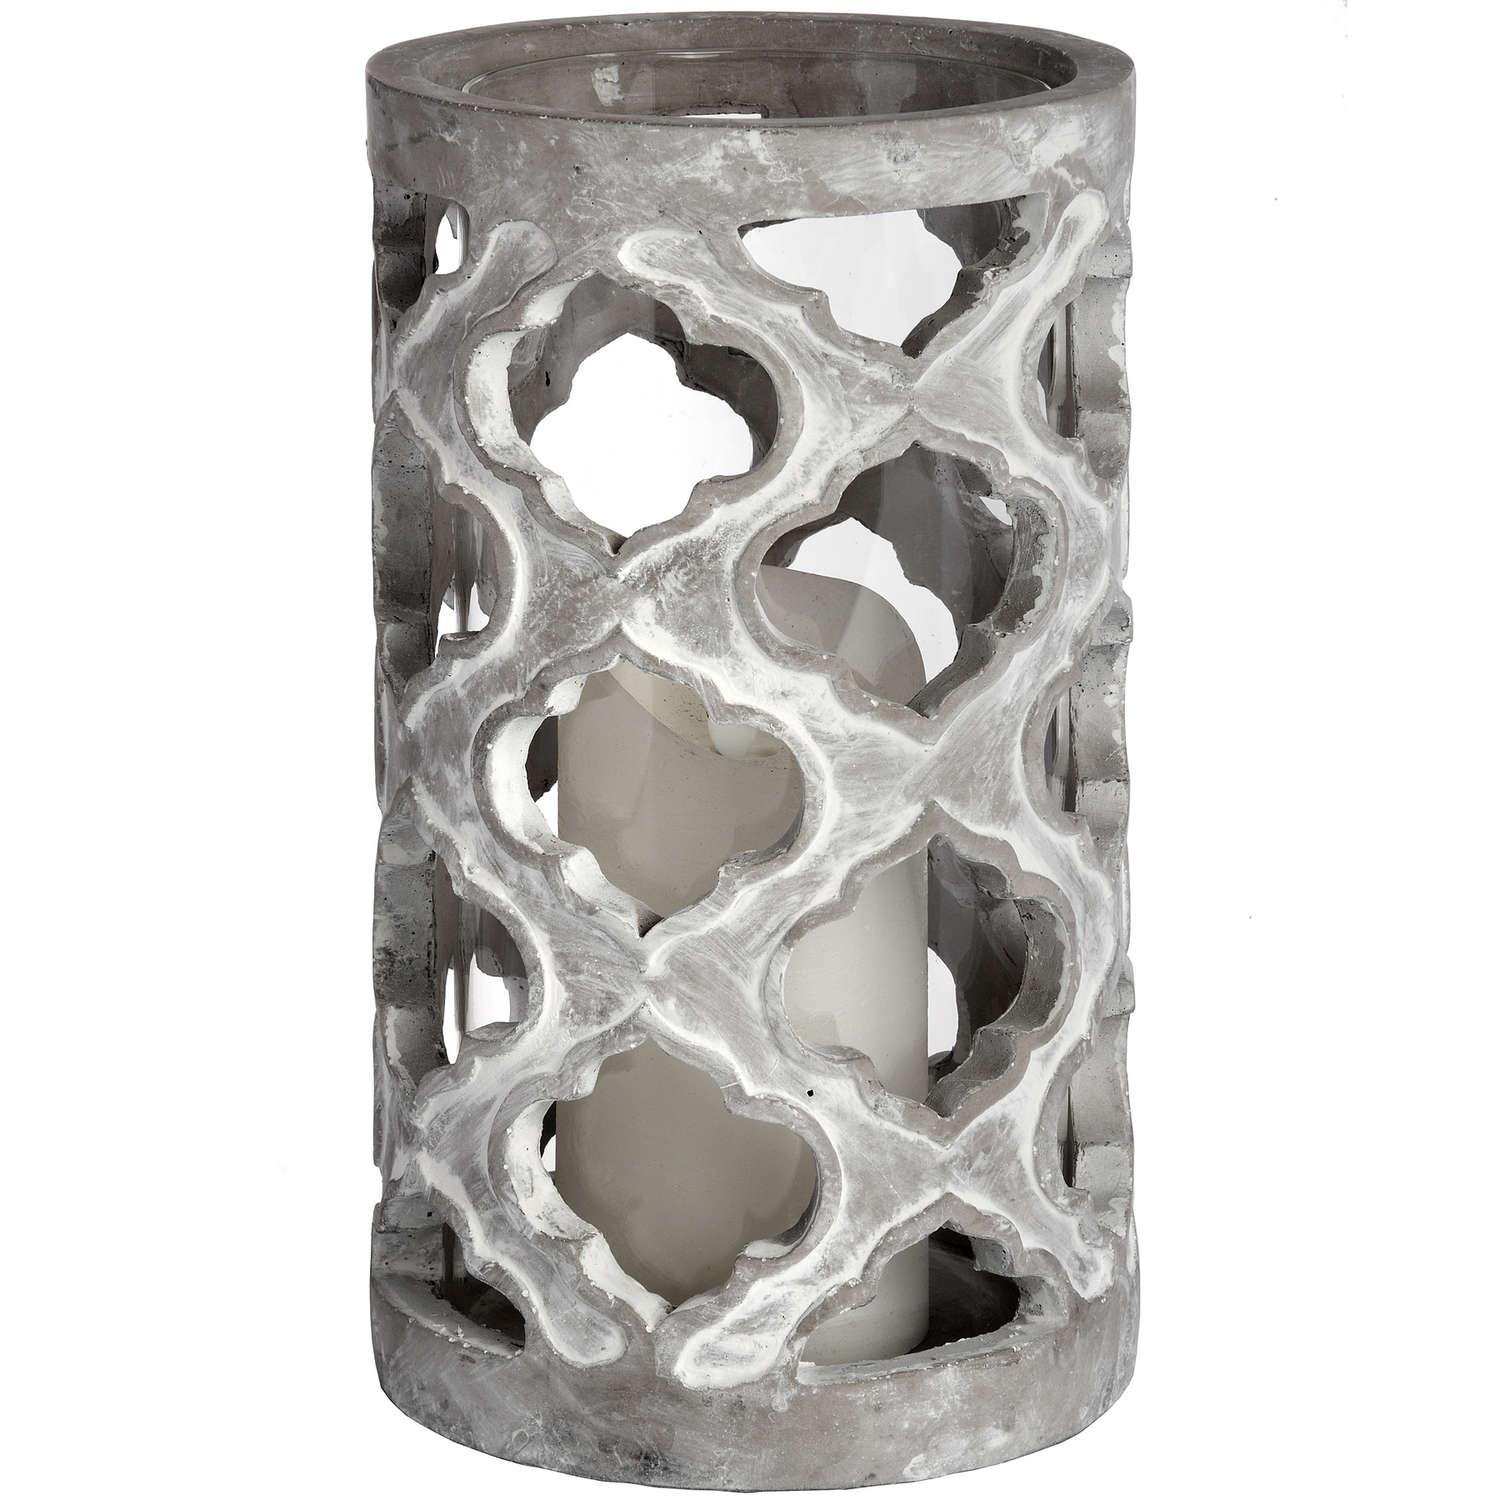 View Large Stone Effect Patterned Candle Holder information